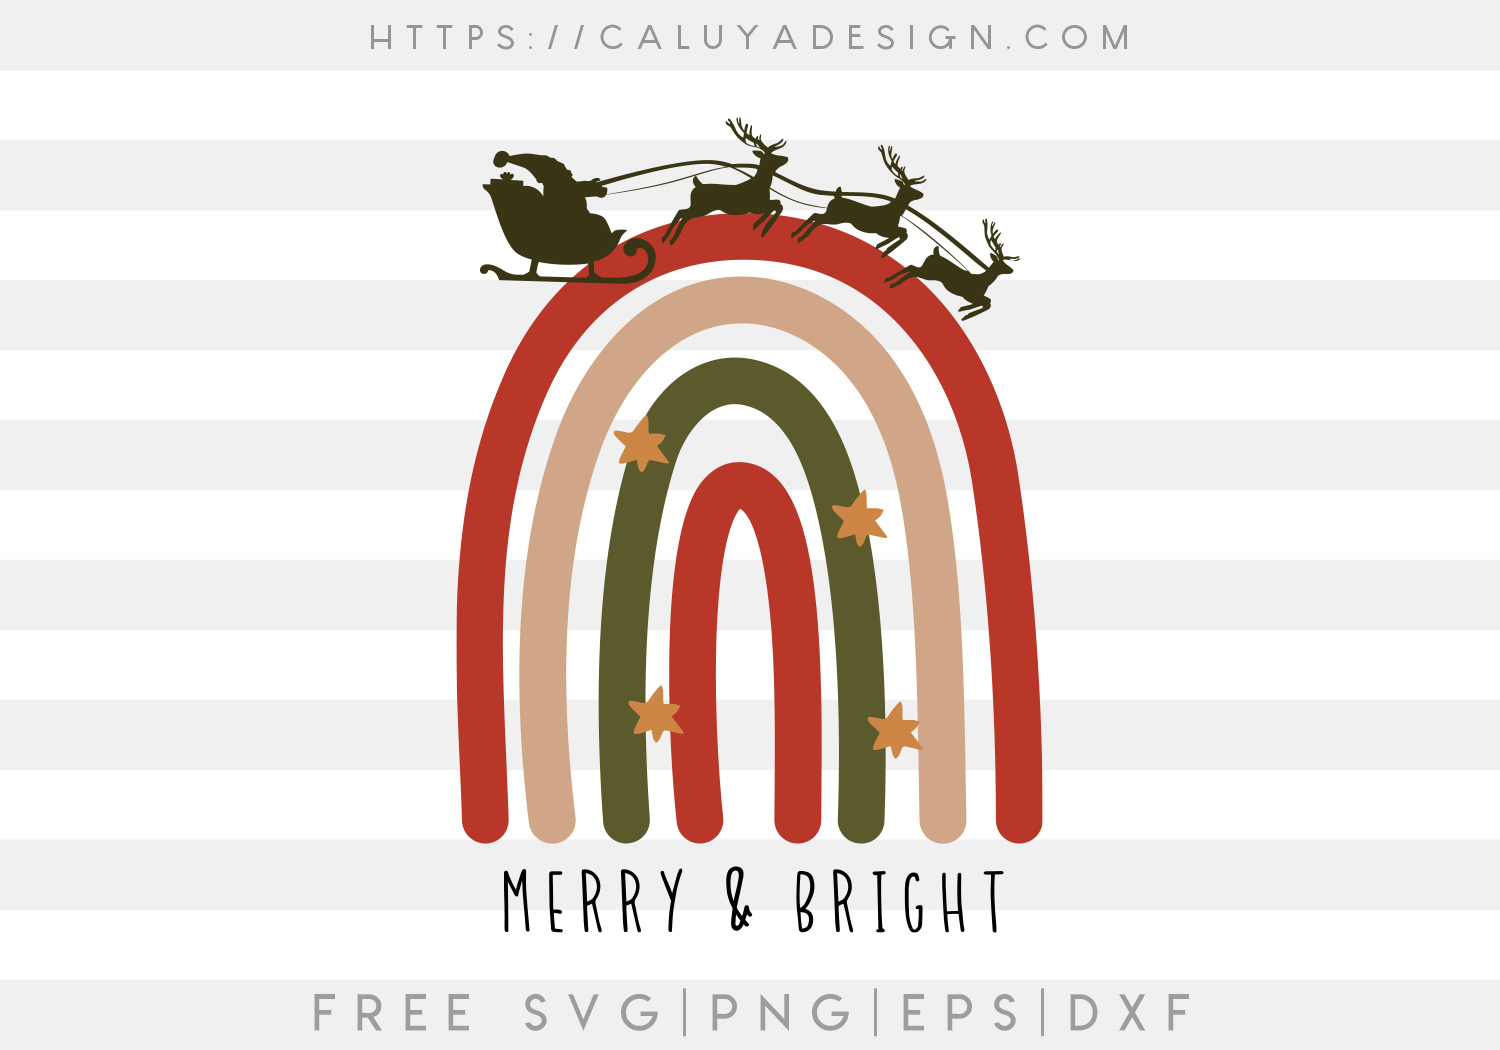 Free Christmas Rainbow SVG, PNG, EPS & DXF by Caluya Design